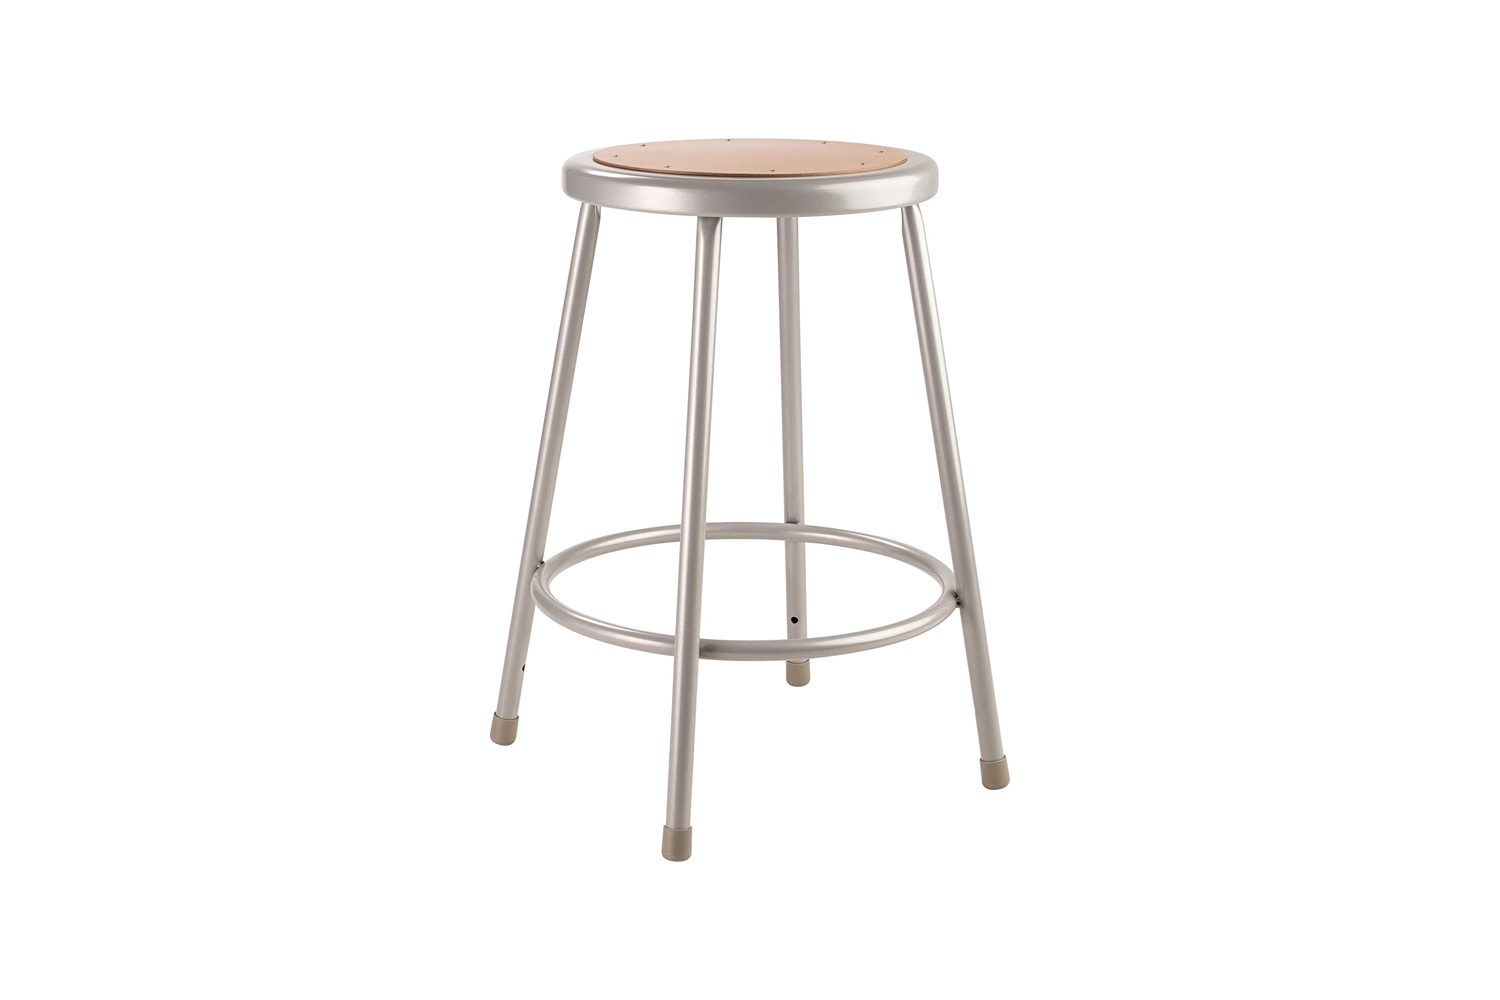 another budget option is the national public seating steel stool in grey starti 20